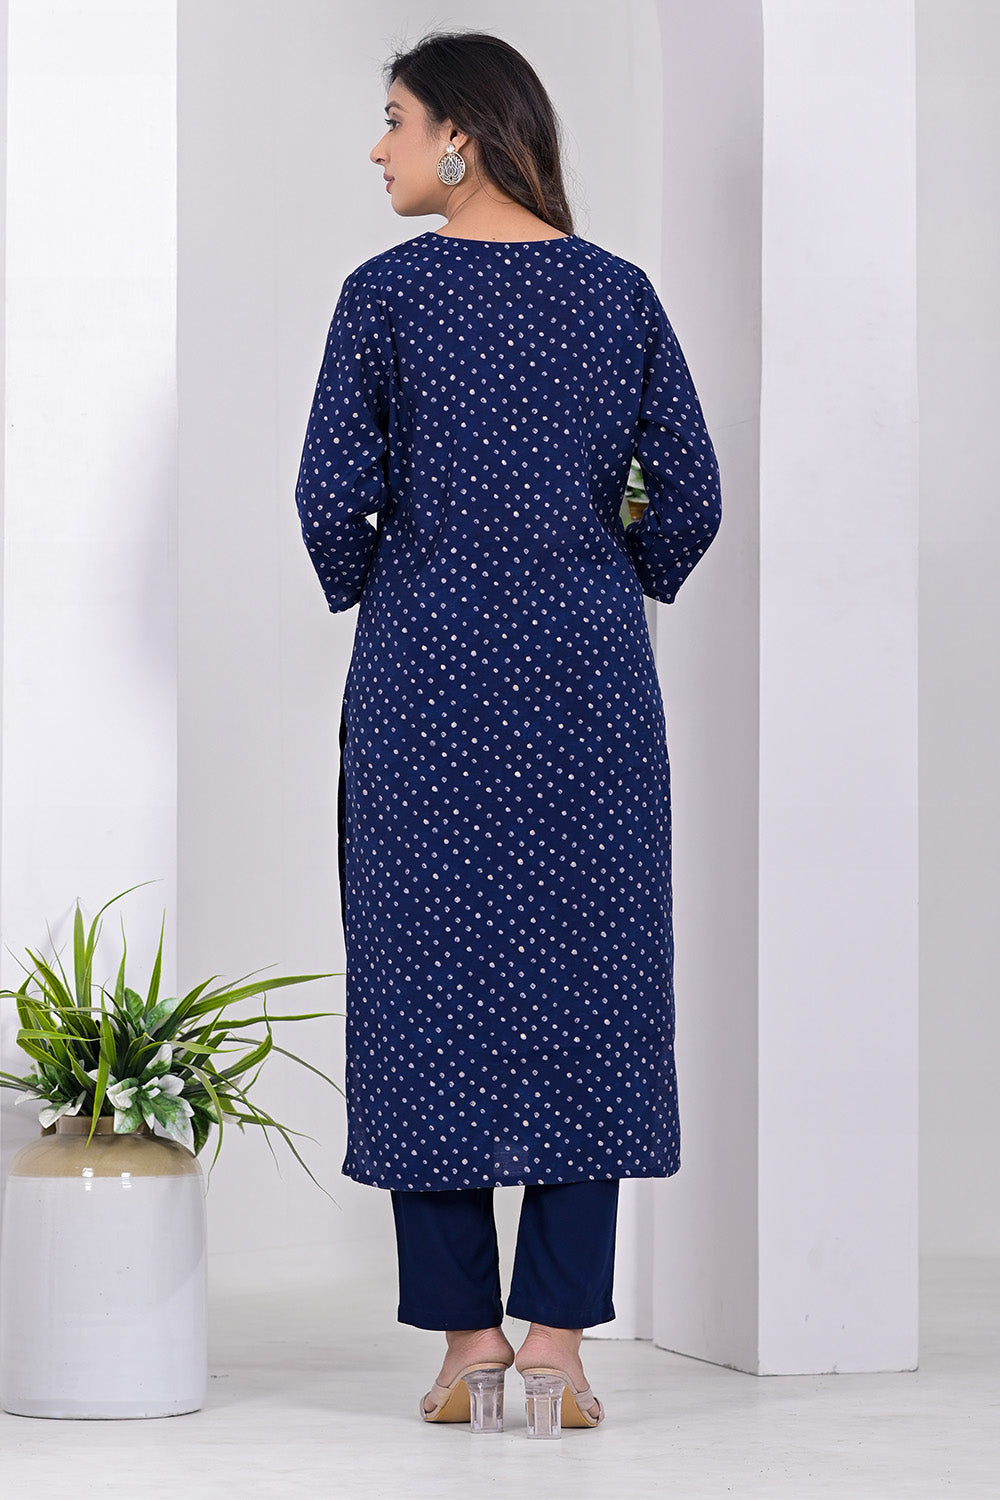 Navy Blue Color Neck Embroidered Printed Muslin Suit